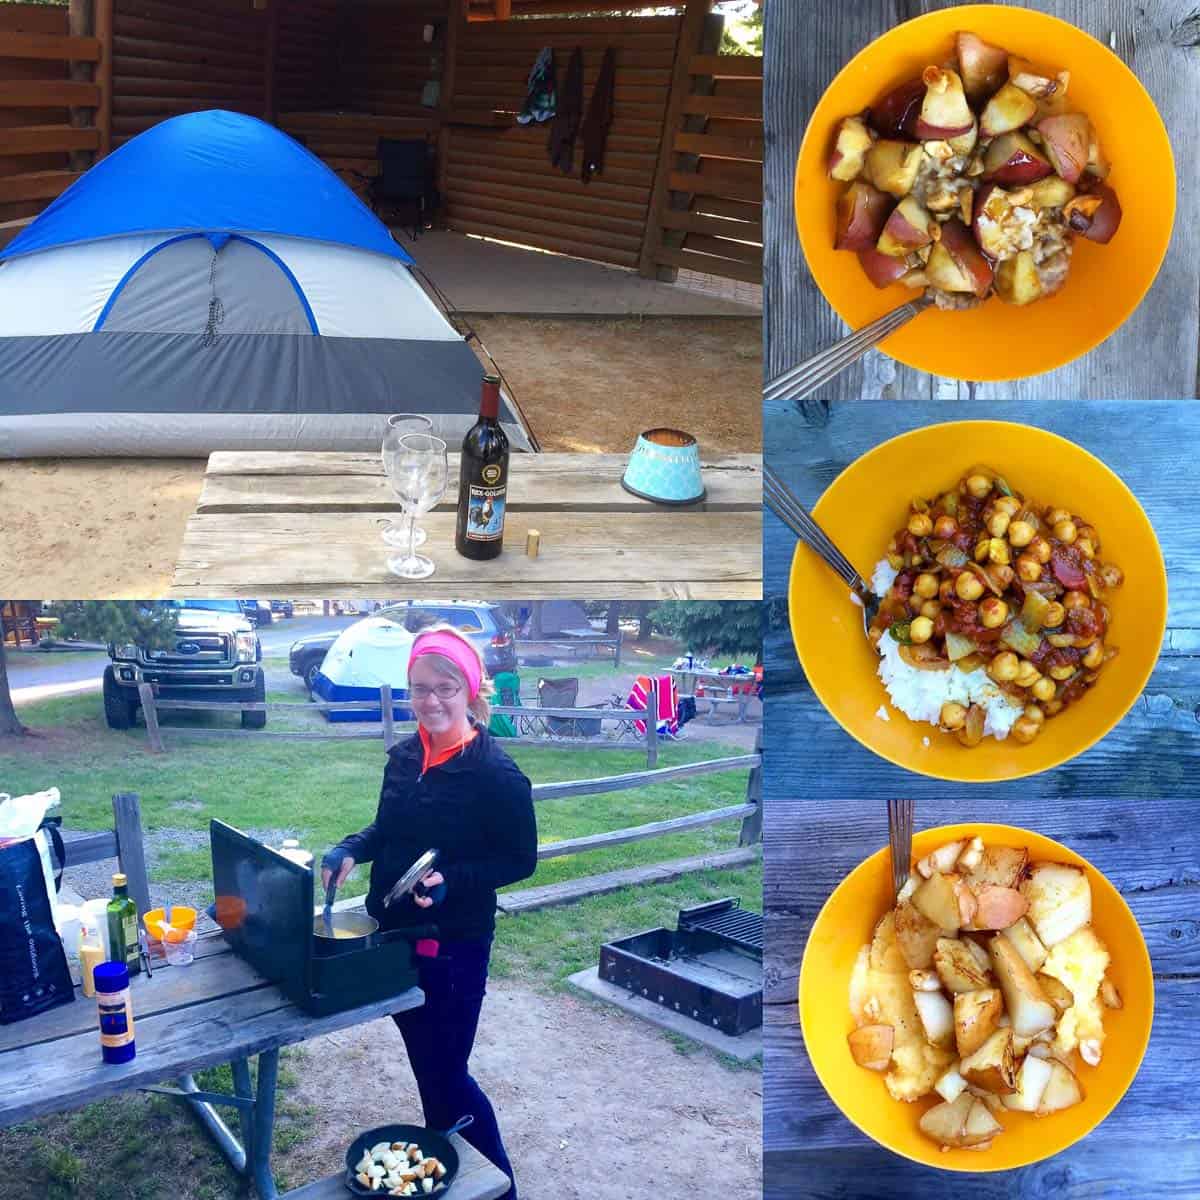 Collage of photos showing tent with tarp over it, woman cooking a meal on a camp stove, and three bowls of food.